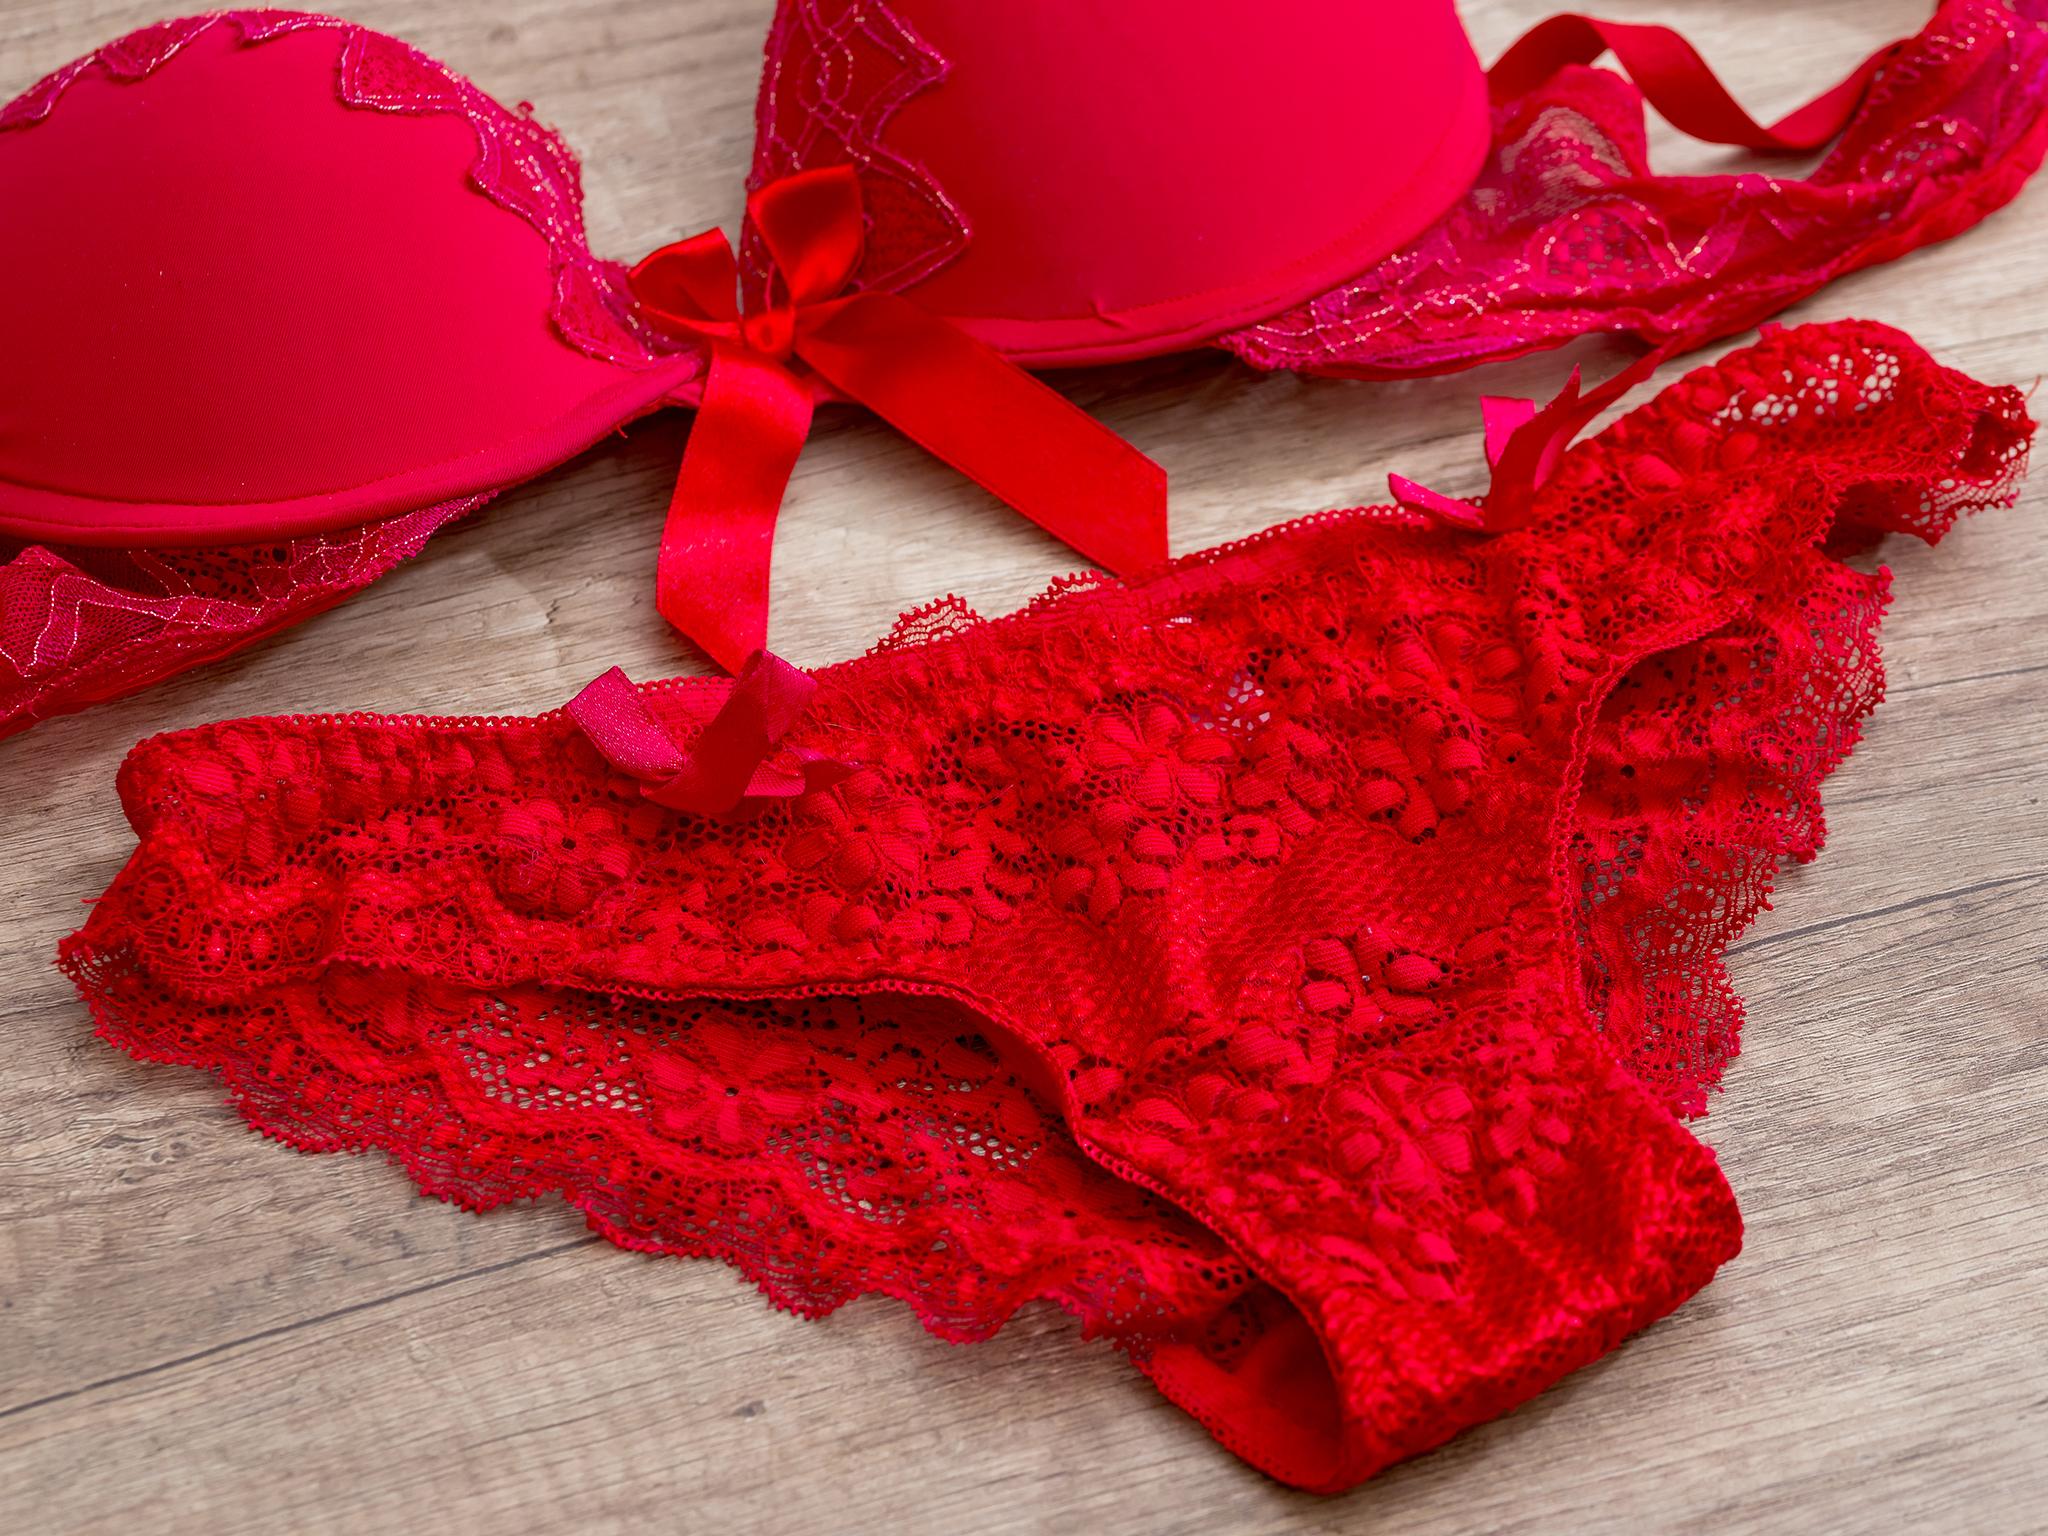 University student sells her used underwear online for up to £50 a